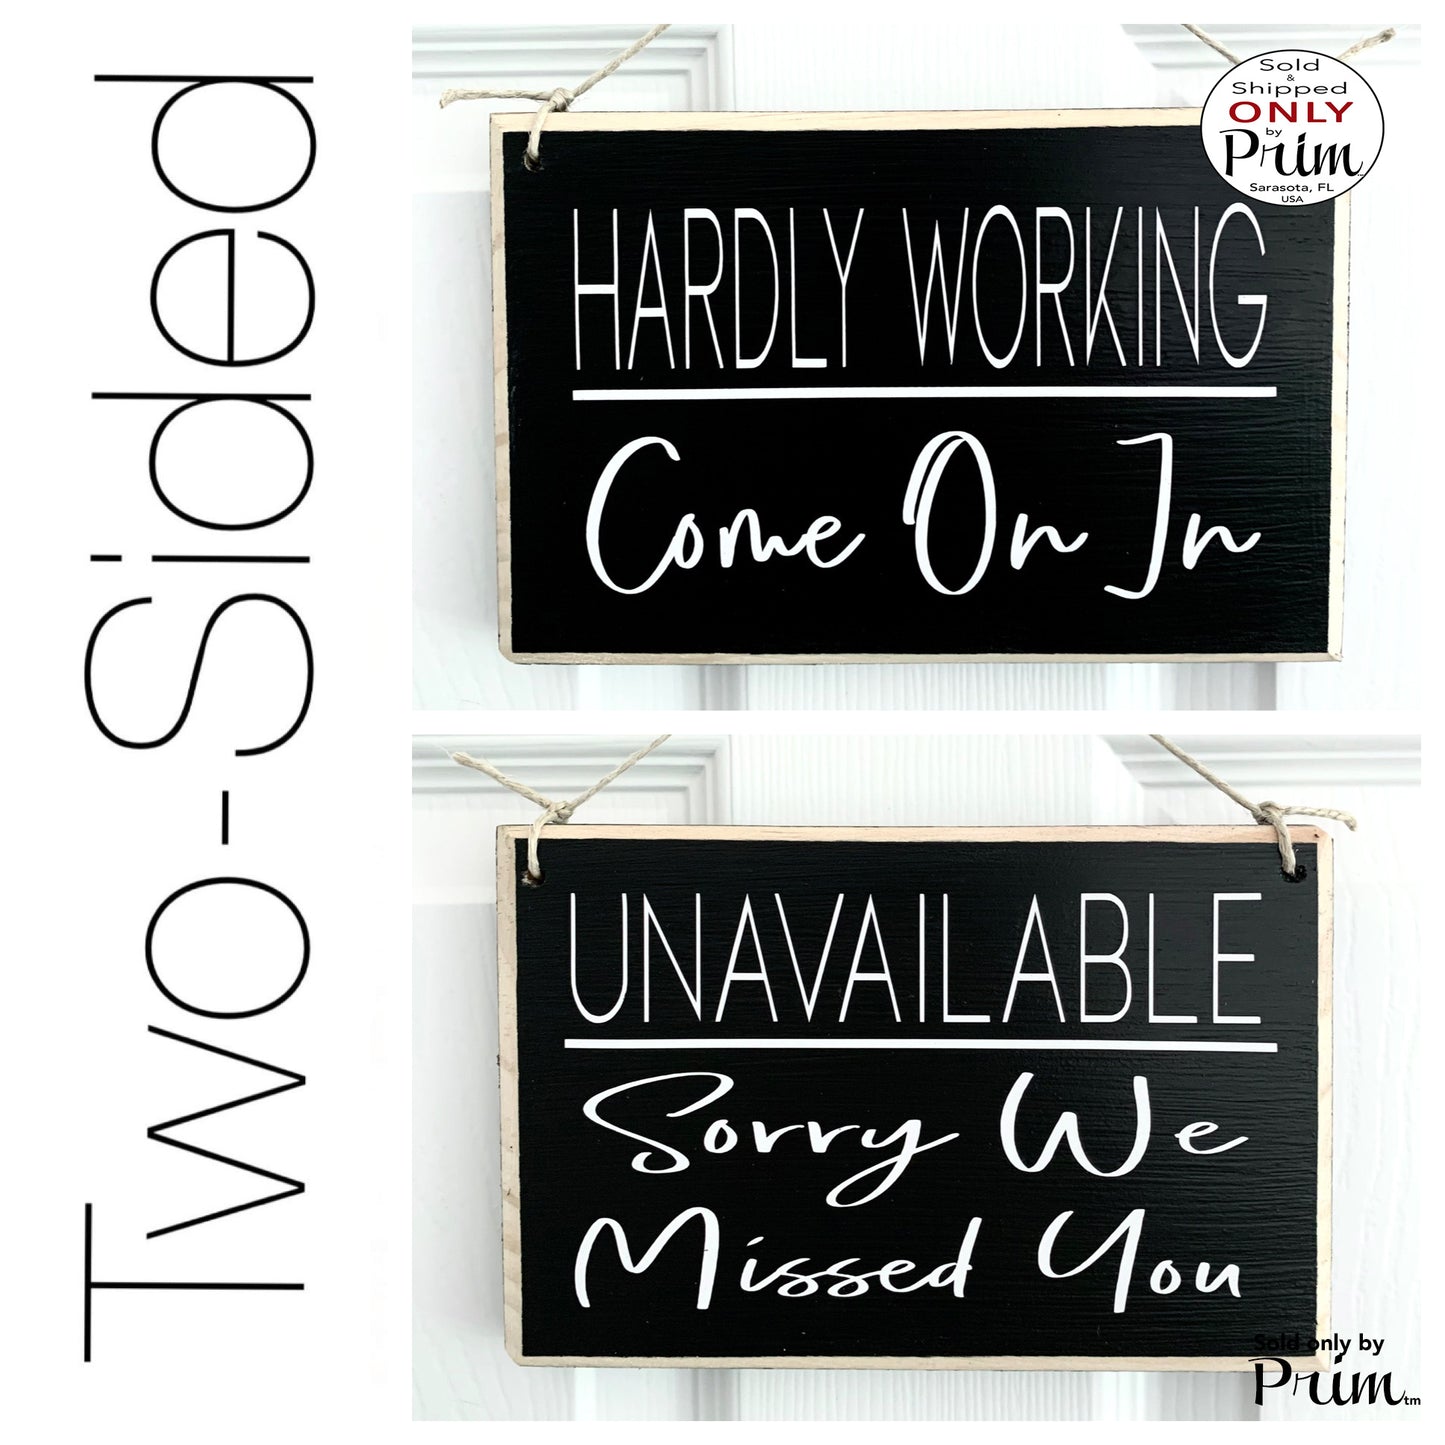 Designs by Prim 8x6 Hardly Working Come On In Unavailable Sorry We Missed You Wood Sign | Office Business In a Meeting in Progress Session Door Plaque